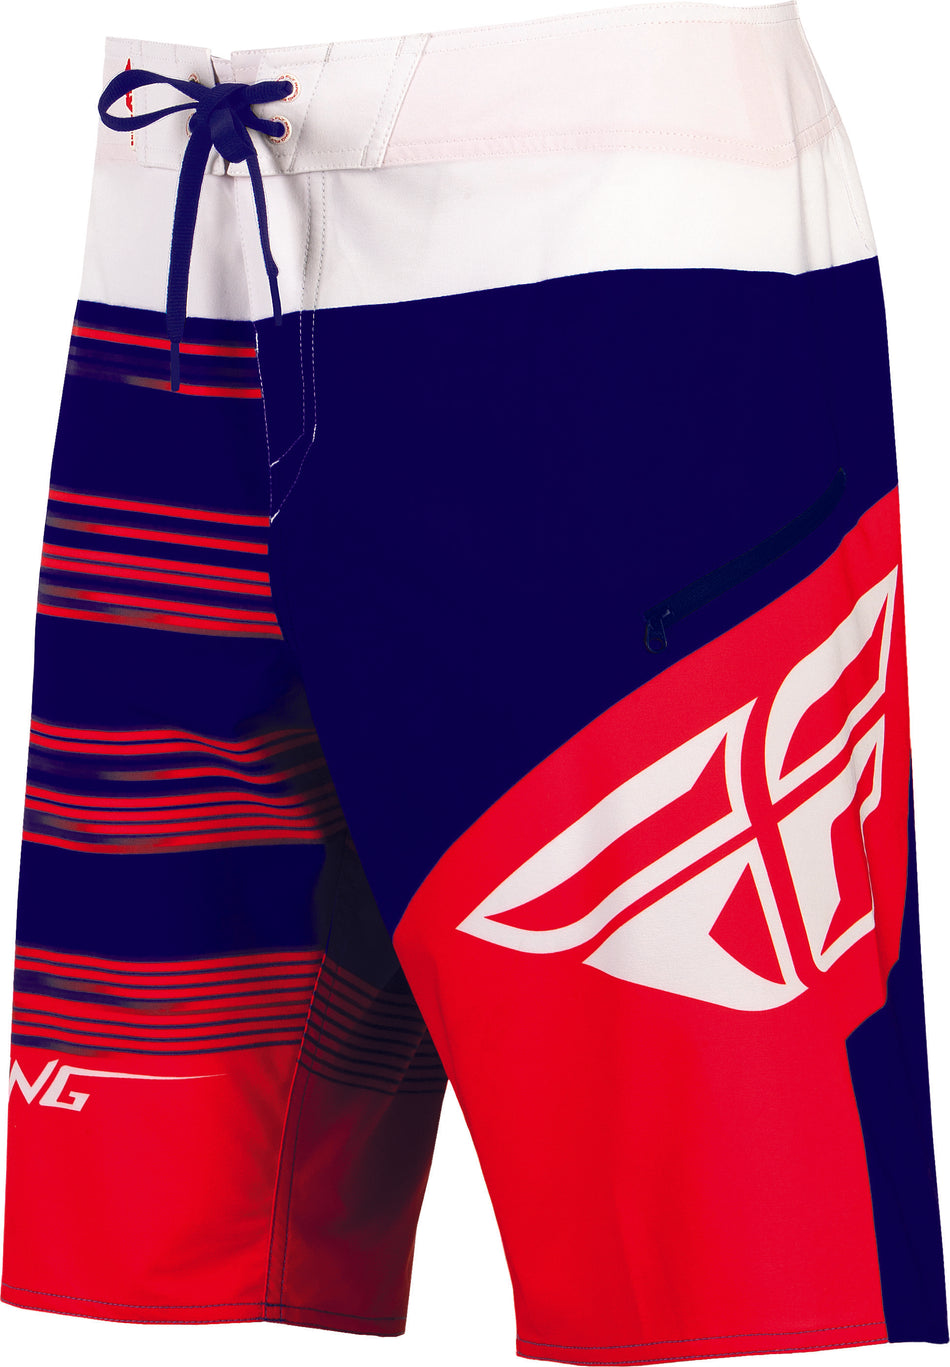 FLY RACING Influx Boardshorts Red/Blue/White Sz 38 353-19238